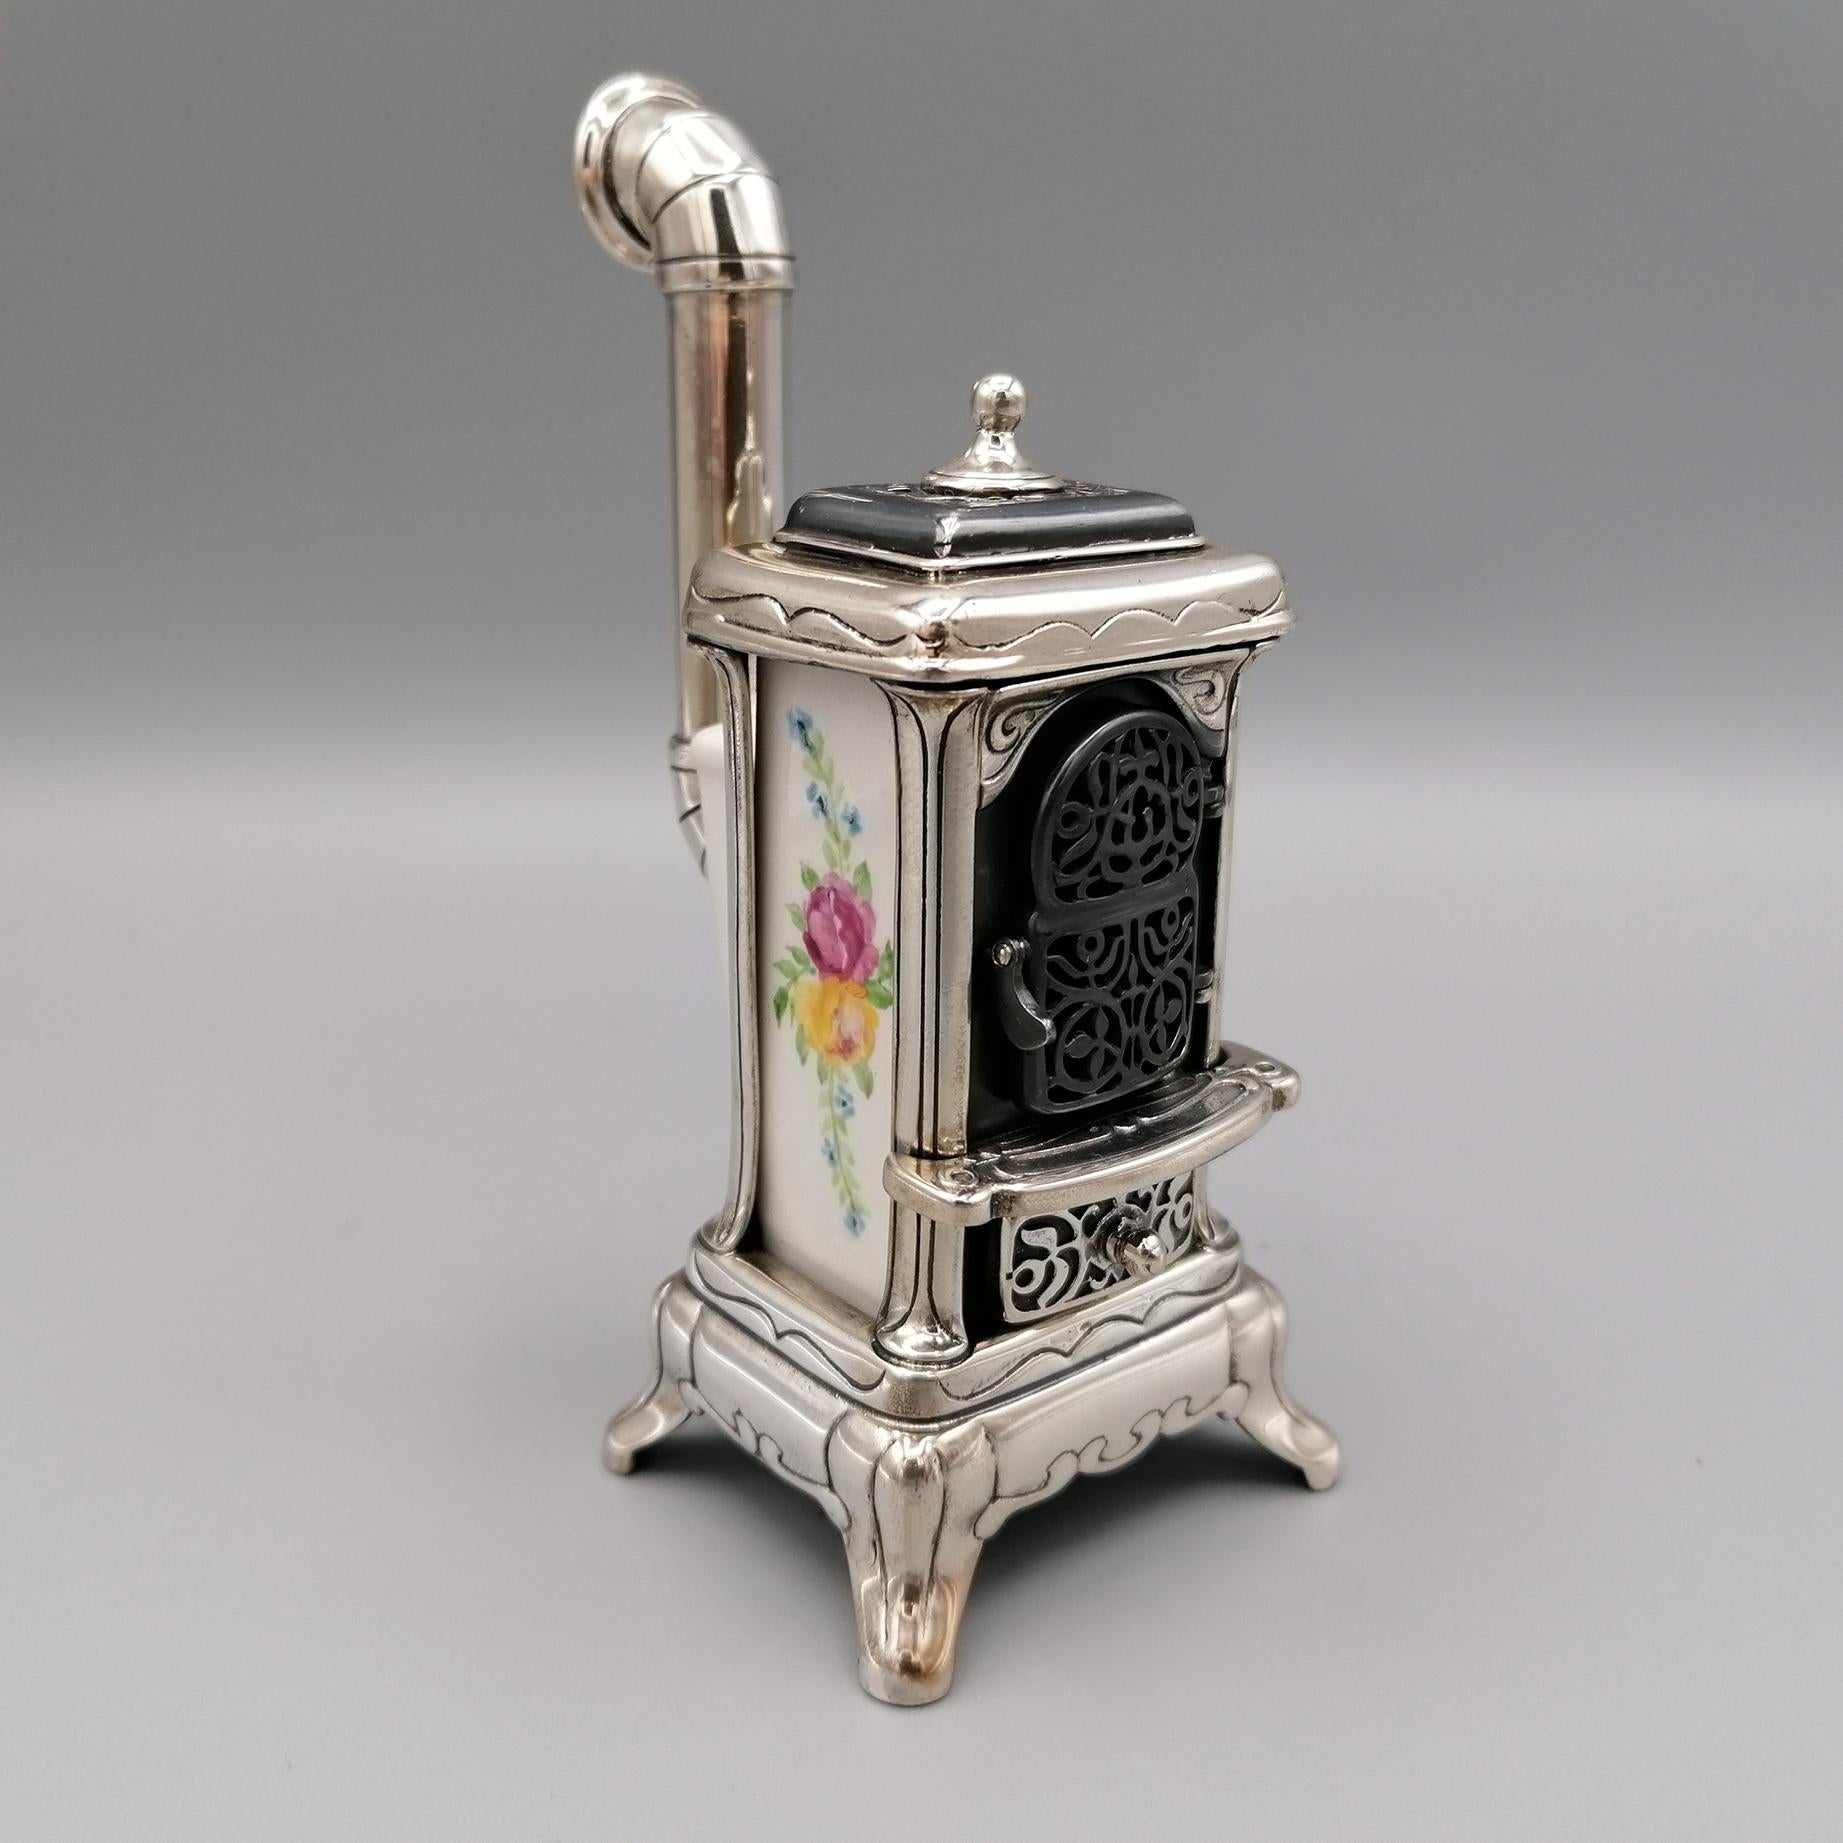 Sterling silver / porcelain wood stove miniature.
The main structure was made of sterling silver while the central body is hand painted porcelain.
Some parts, such as the lid of the stove and the door, have been perforated and burnished to create